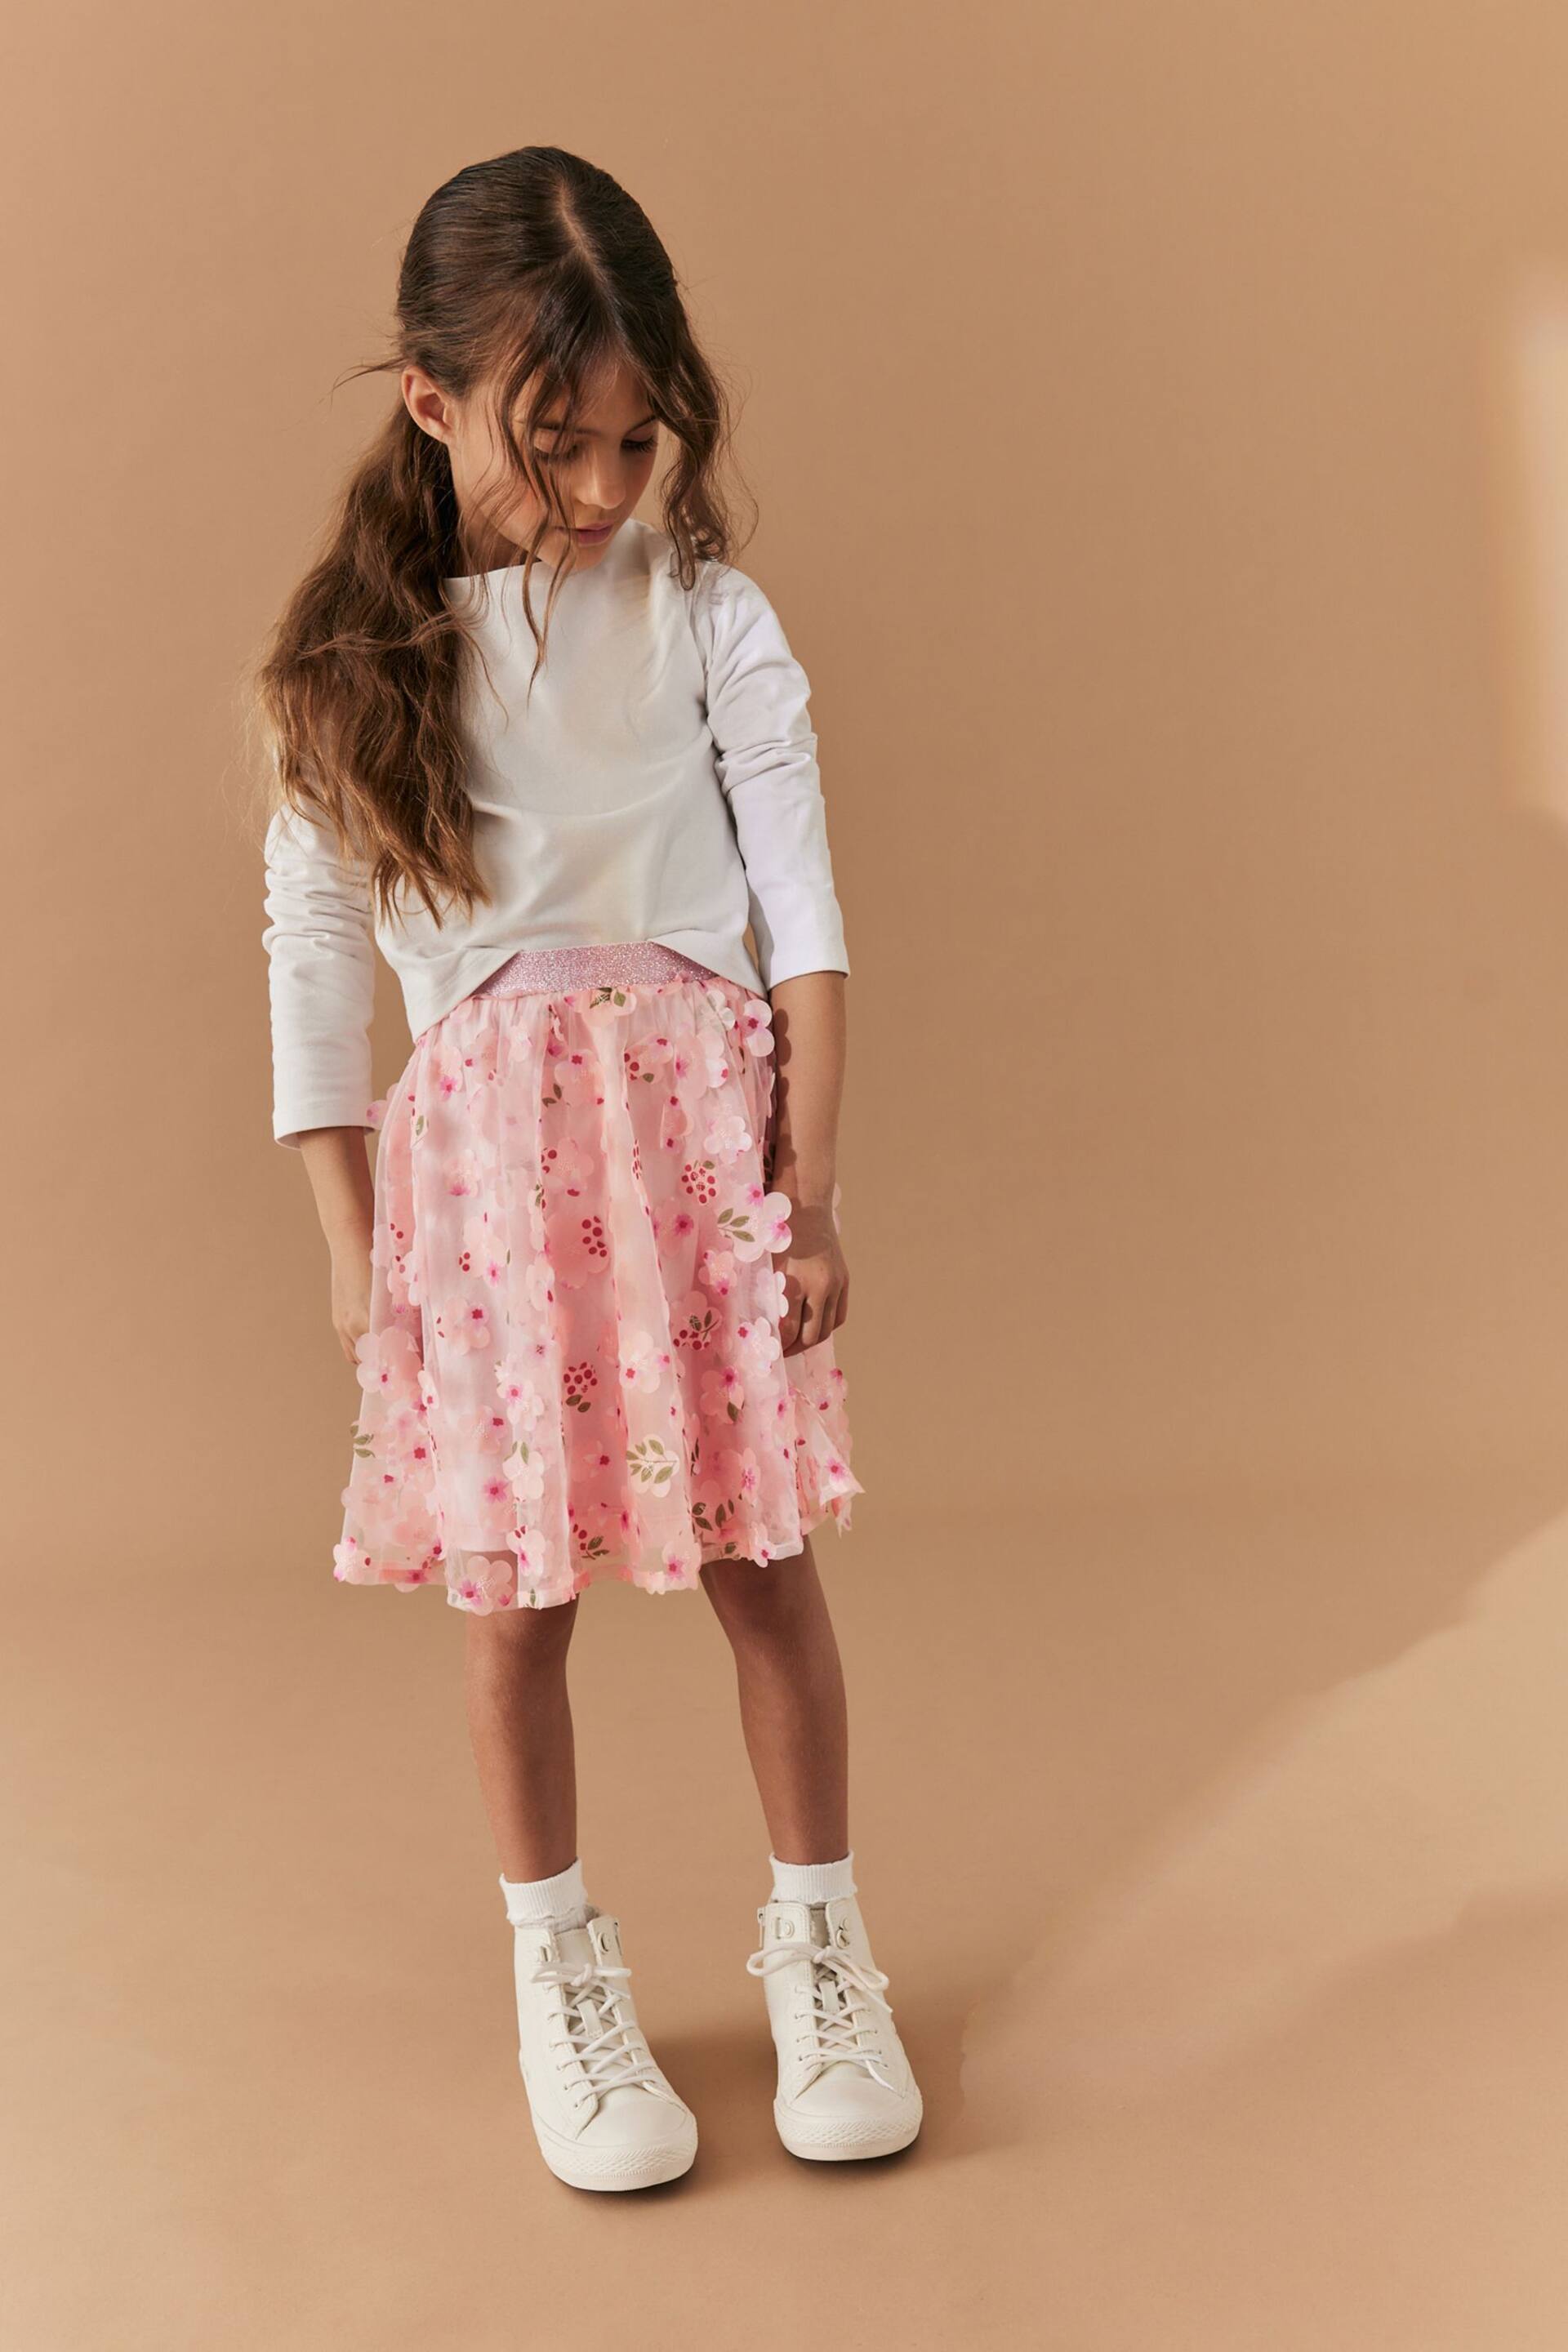 Blush Pink 3D Floral Pull-On Skirt (3-16yrs) - Image 1 of 7